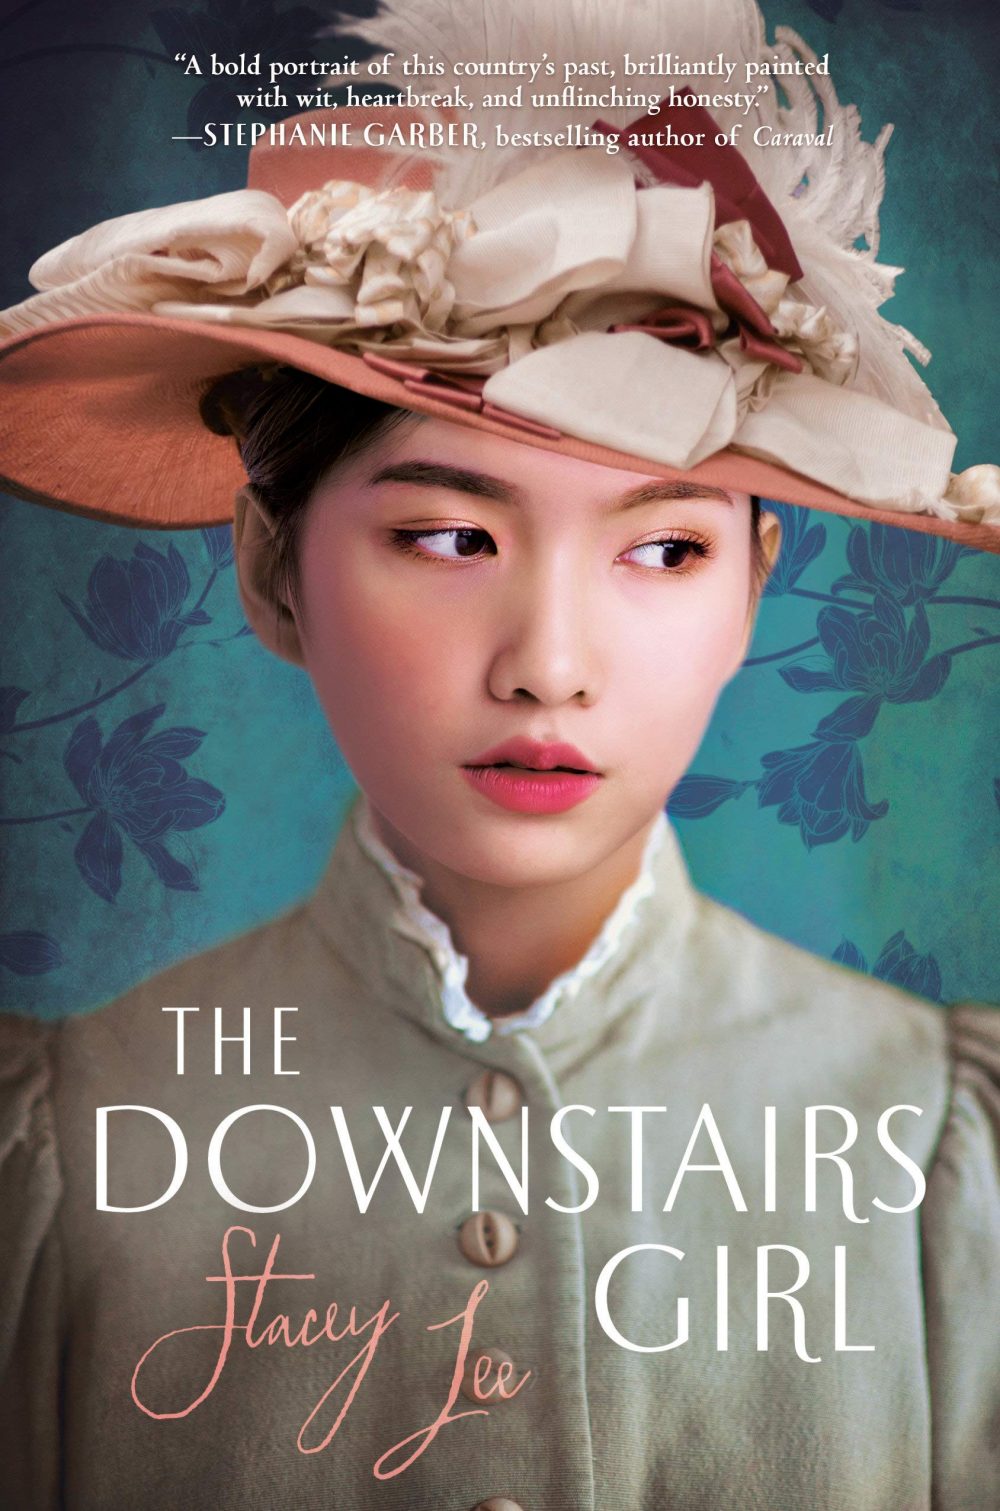 The Downstairs Girl book